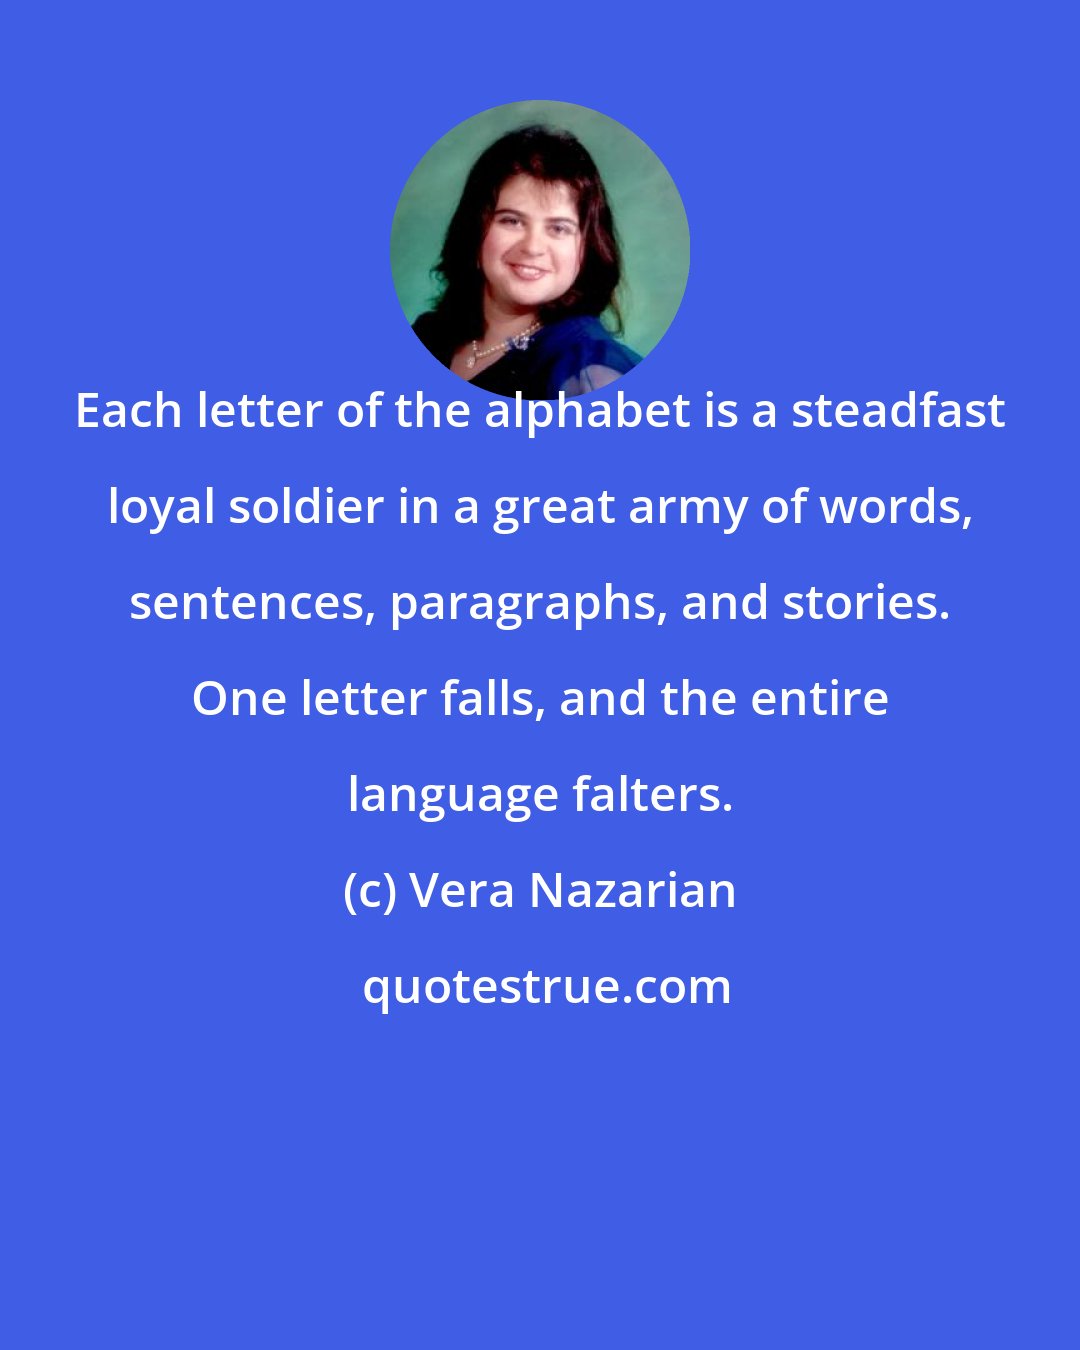 Vera Nazarian: Each letter of the alphabet is a steadfast loyal soldier in a great army of words, sentences, paragraphs, and stories. One letter falls, and the entire language falters.